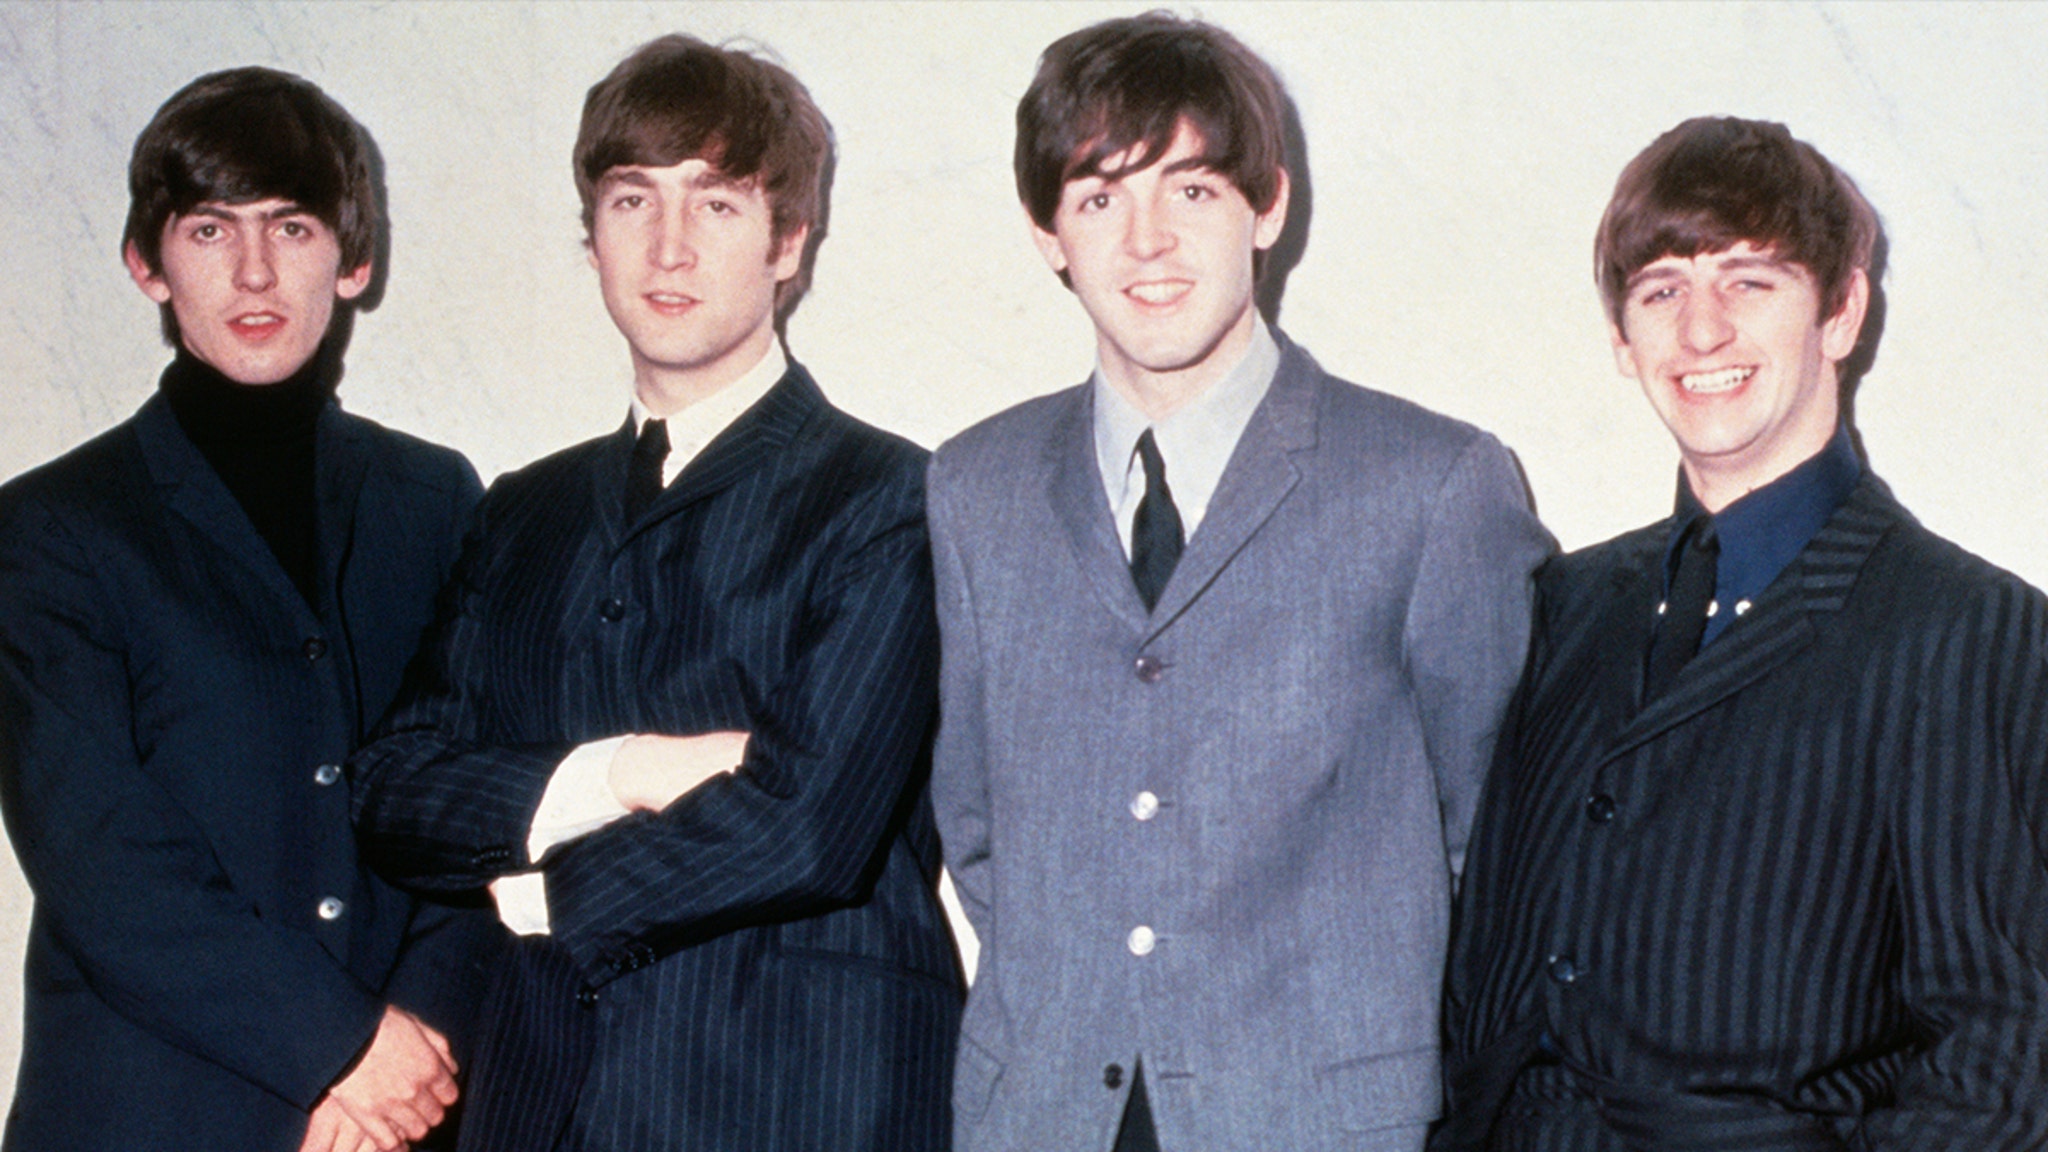 Lost Beatles Recording Tapes Up For Auction, Expected to Fetch $500k